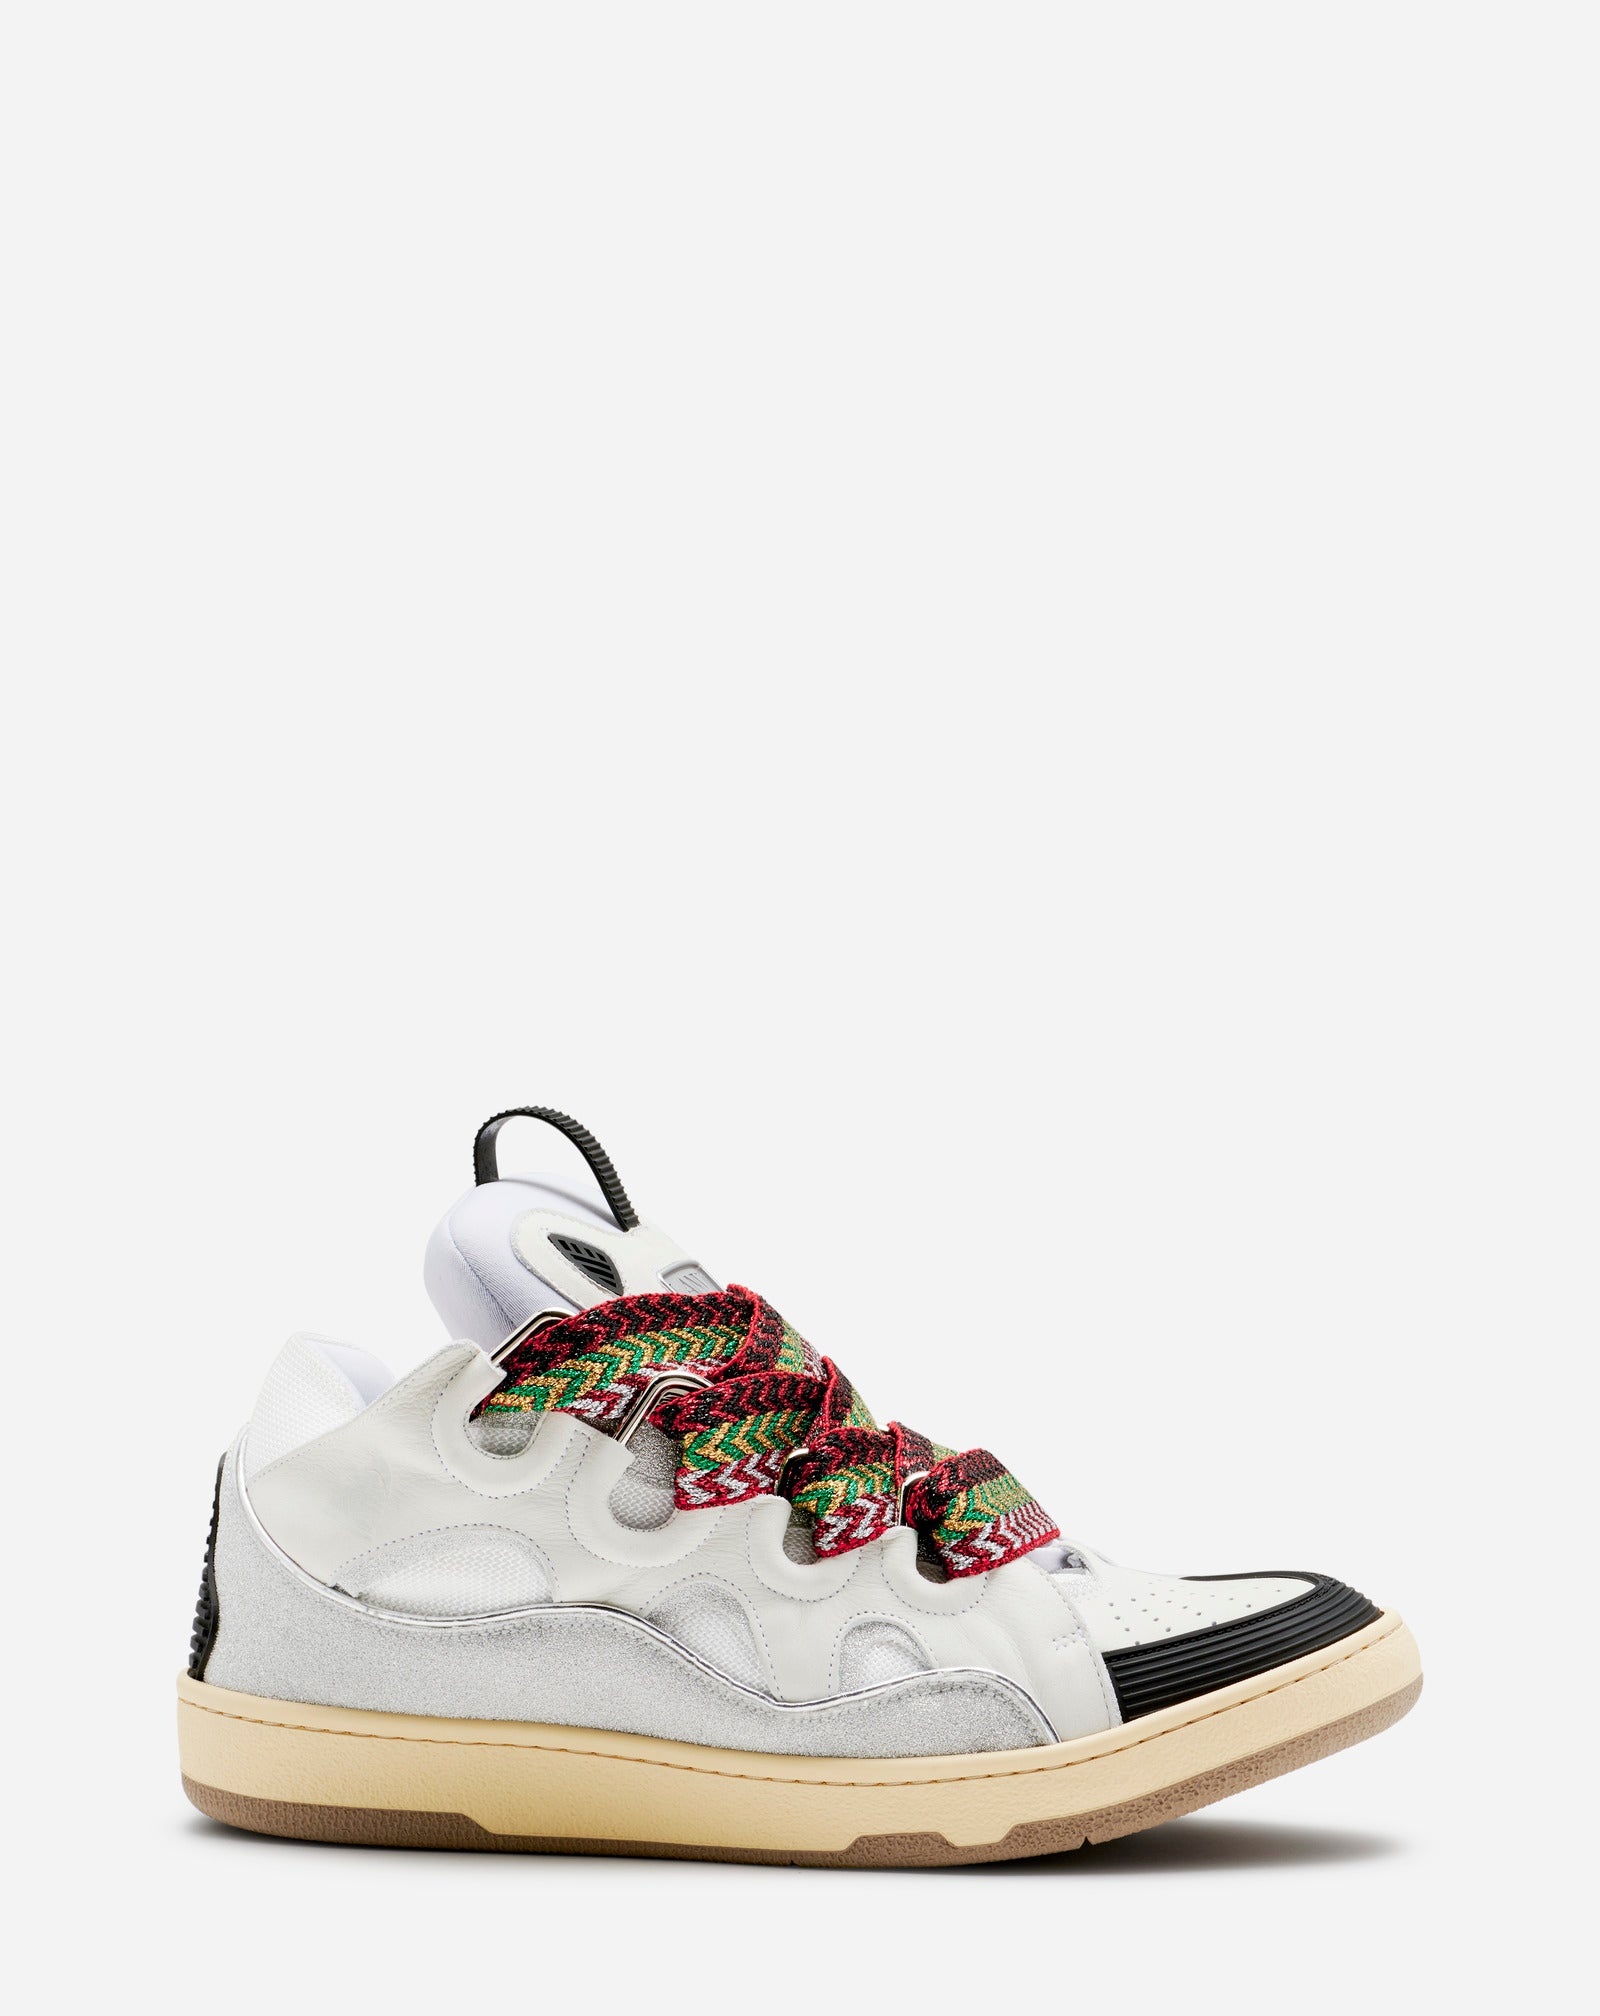 Lanvin LEATHER AND GLITTER TECHNICAL MATERIAL CURB SNEAKERS 